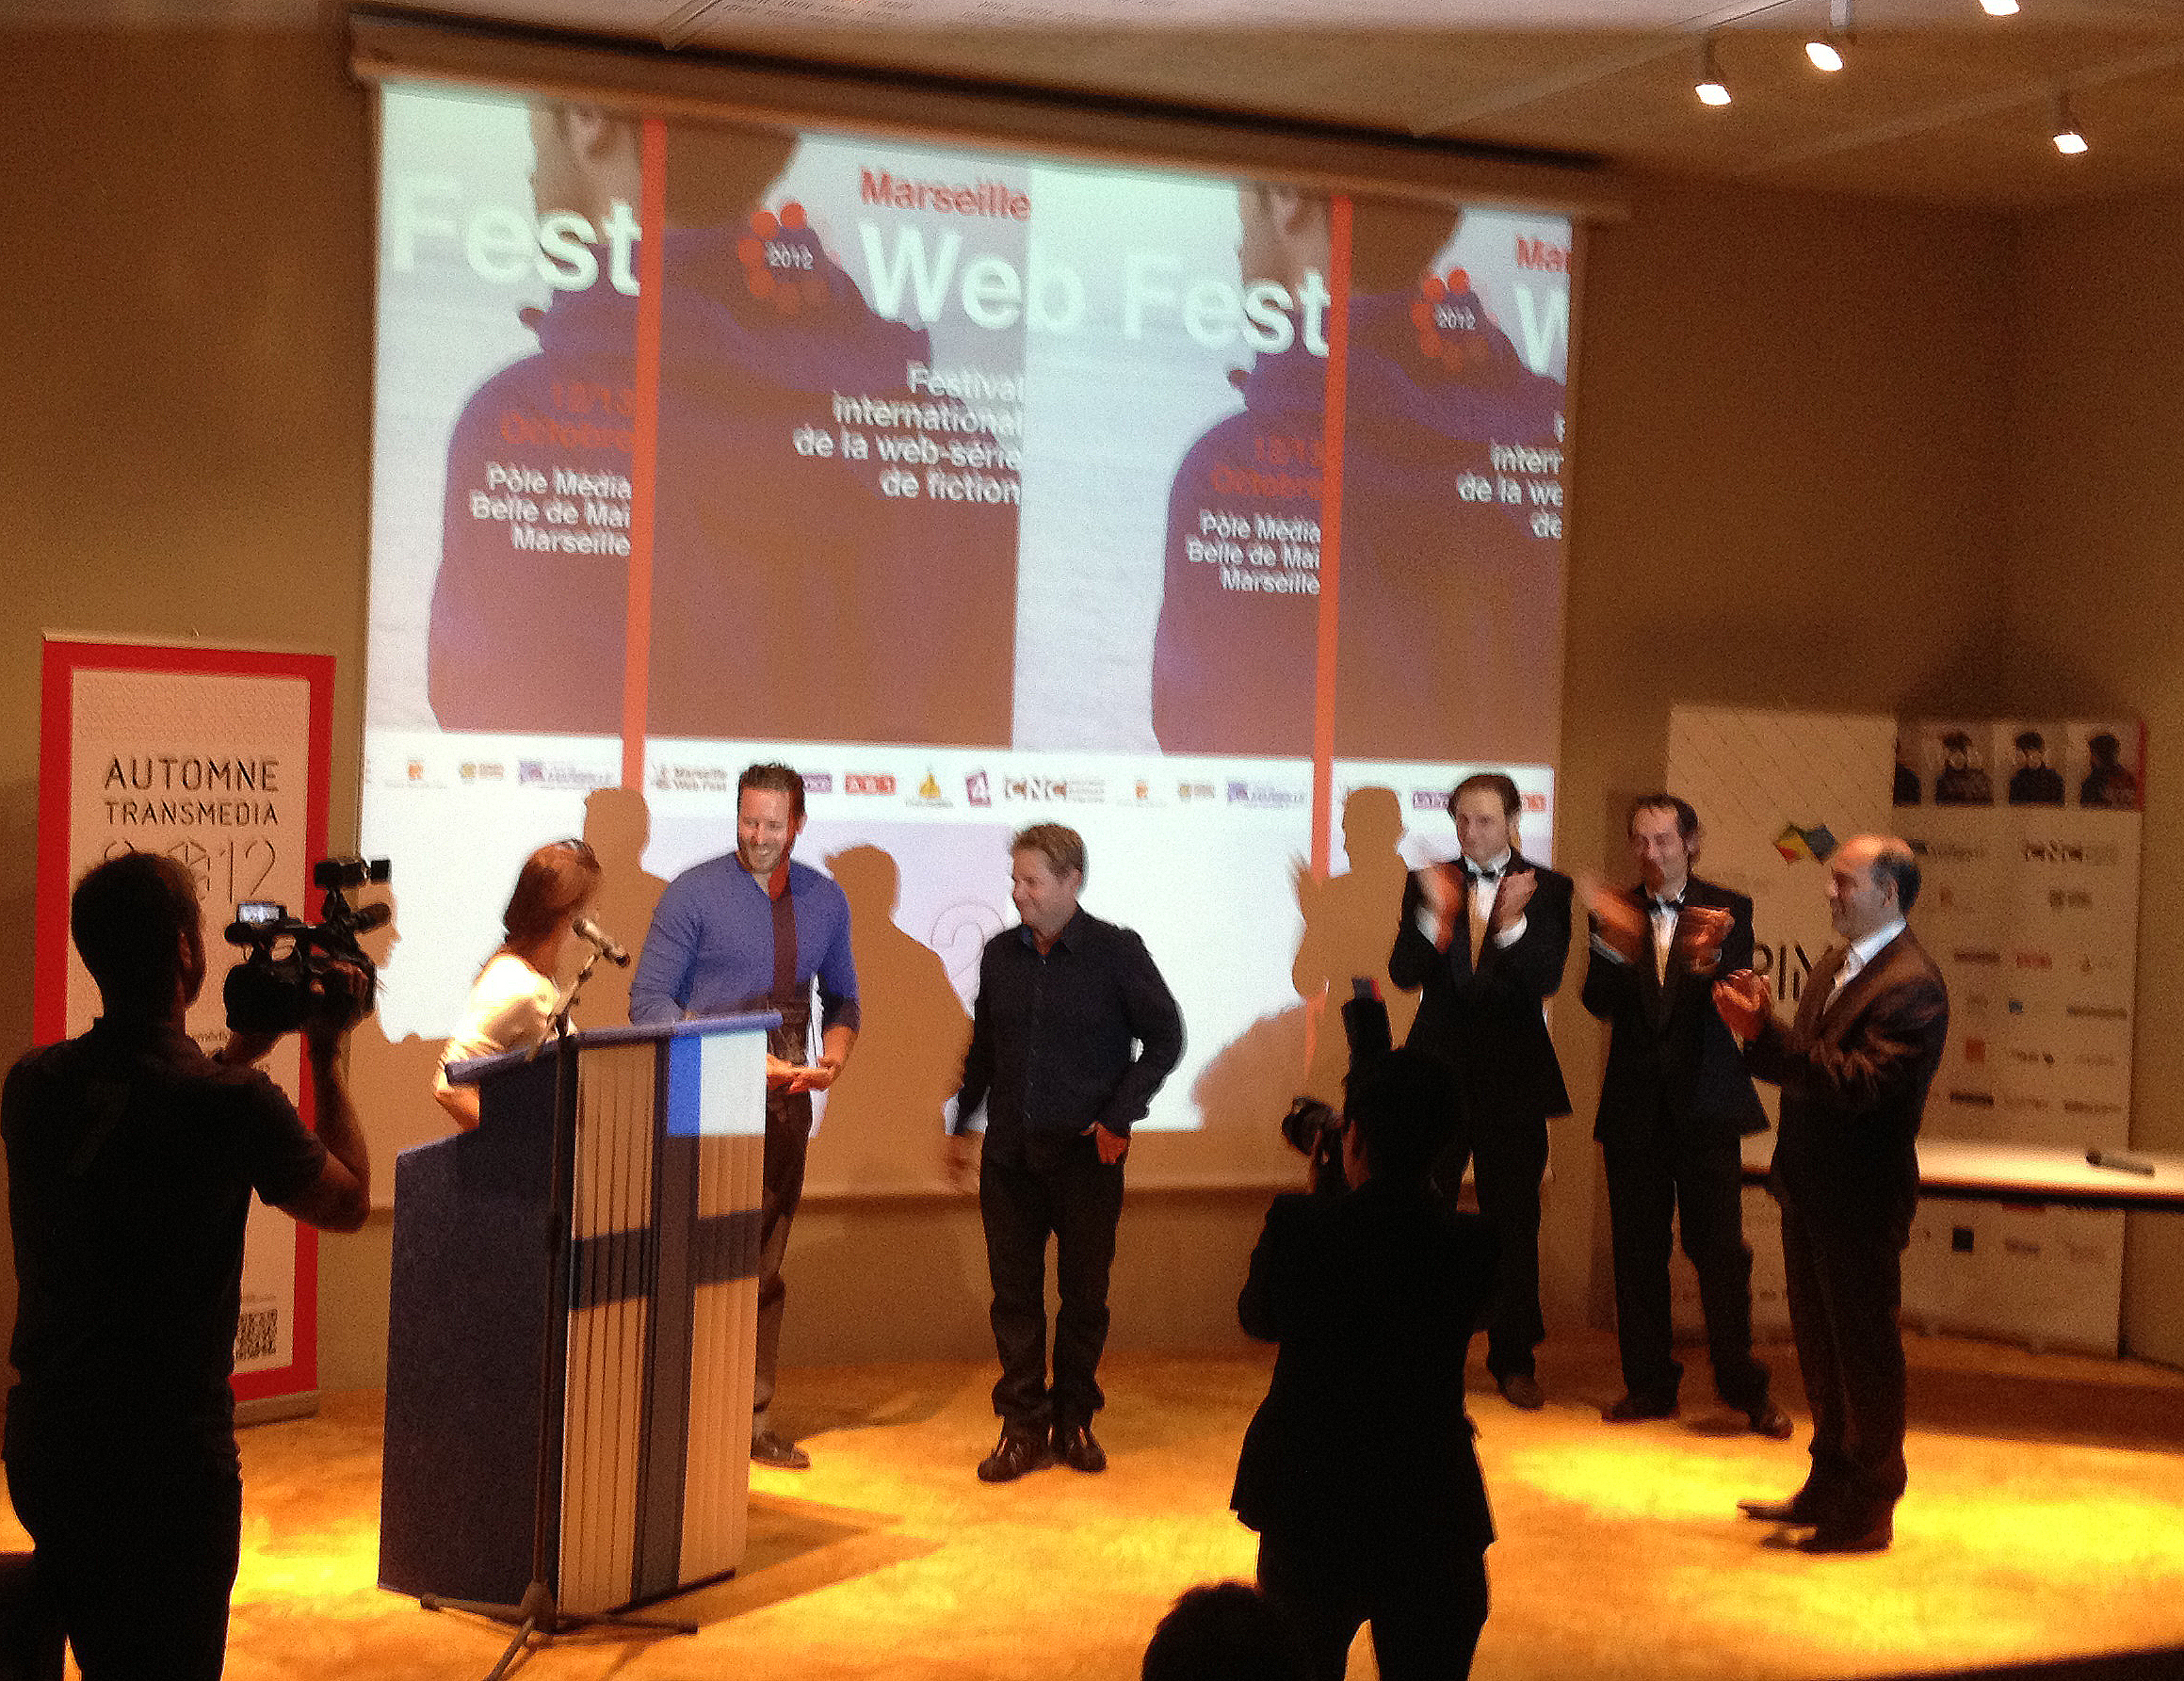 Ty Clancey & The Lost Nomads win the Prix du Jury at Marseilles Web Fest for 